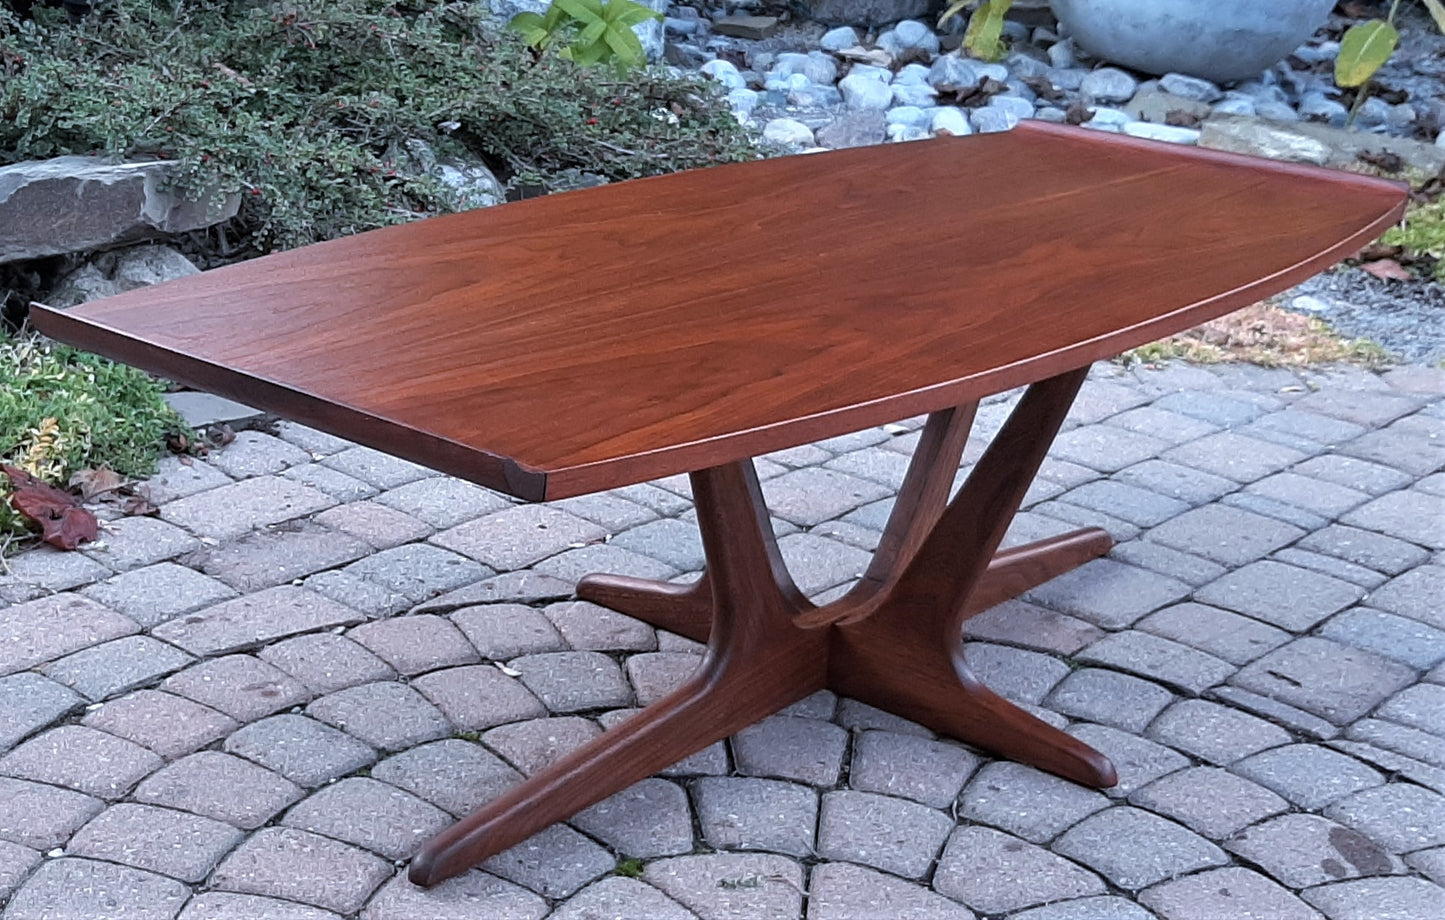 REFINISHED MCM Walnut Surfboard Coffee Table by Deilcraft 54", PERFECT